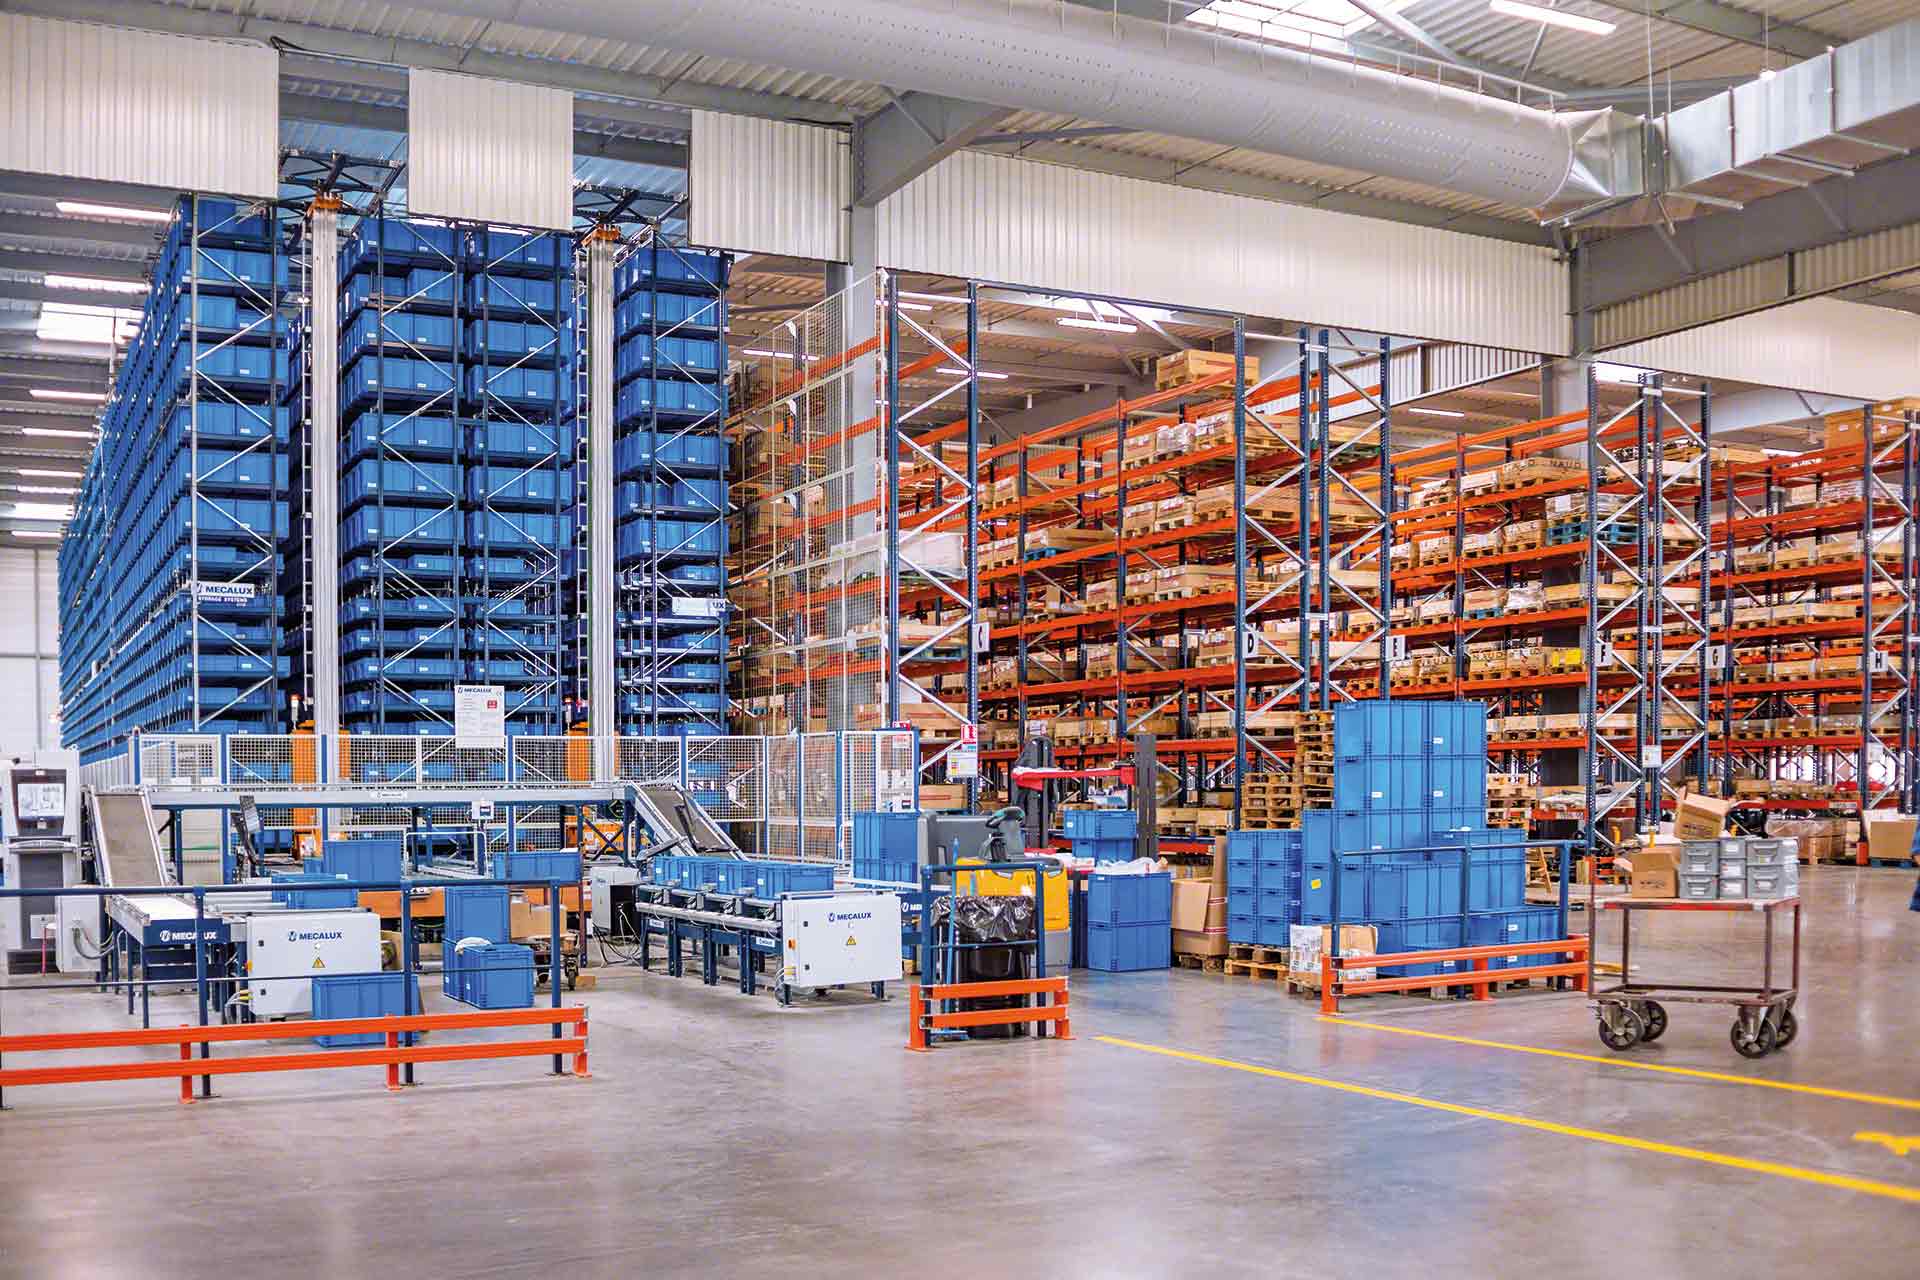 Pros And Cons If You Use Automated Storage And Retrieval Systems (ASRS